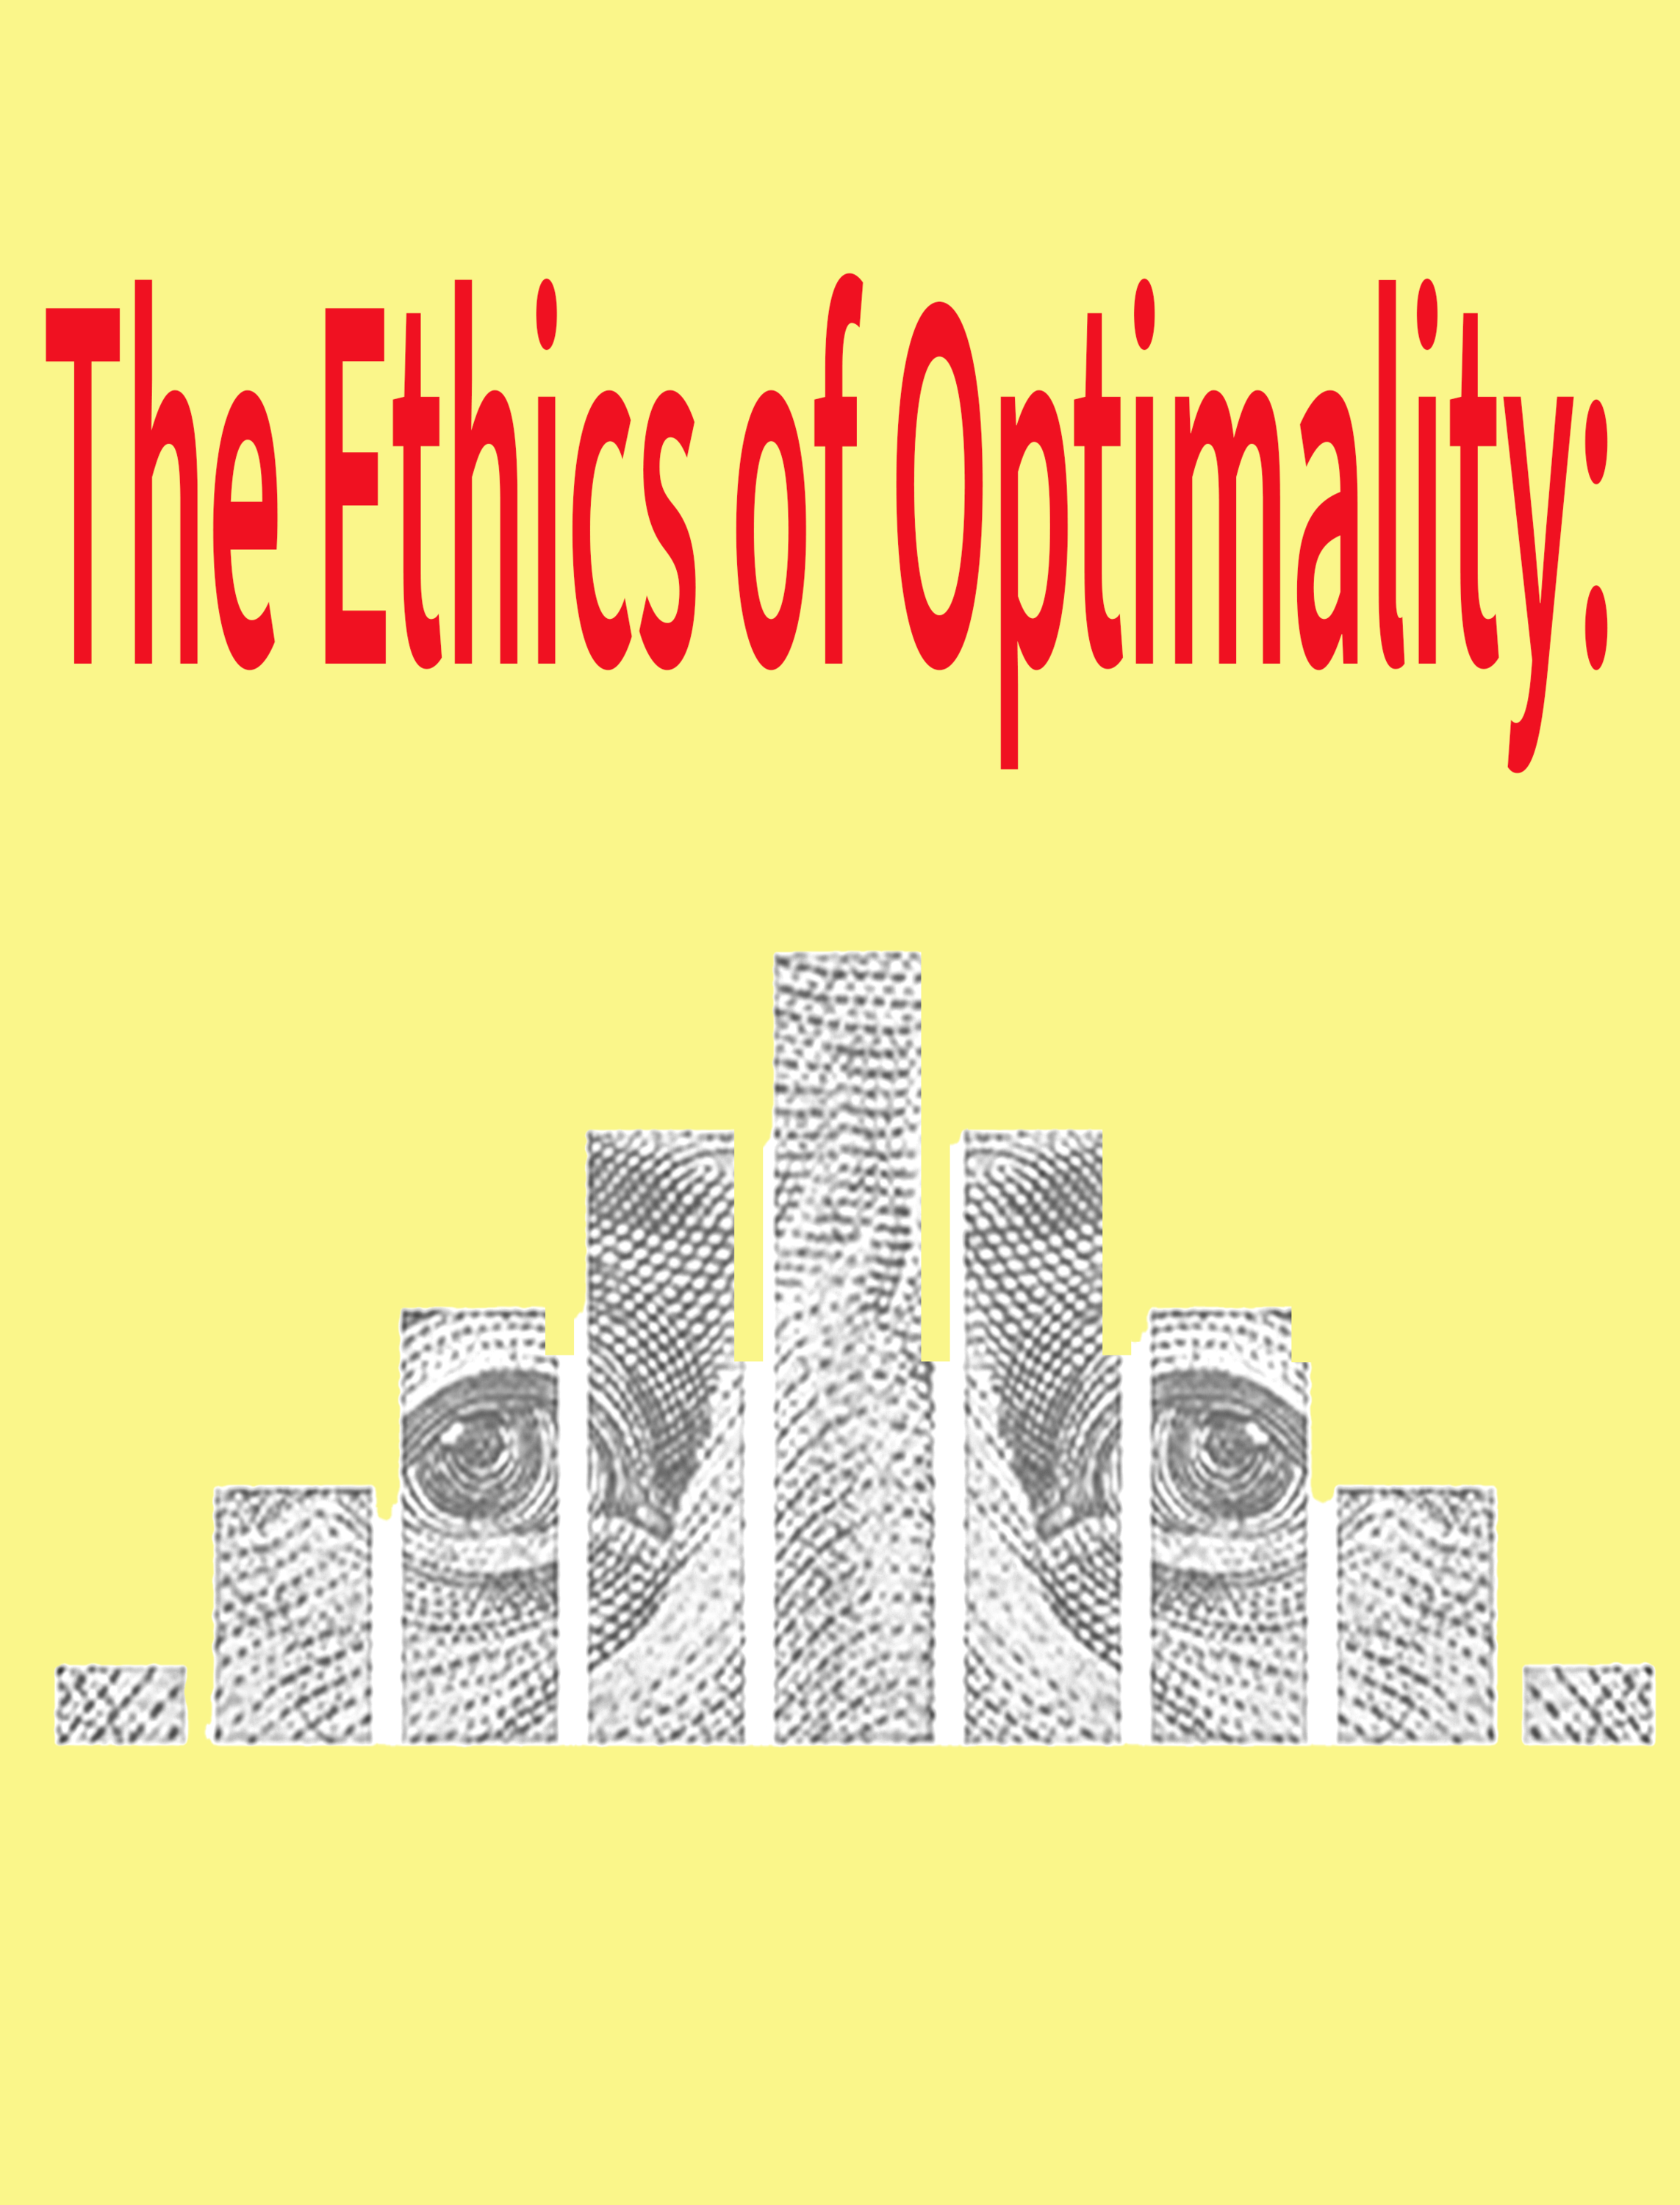 a bar graph with image of 2 eyes in it, text reads " The Ethics of Optimality"